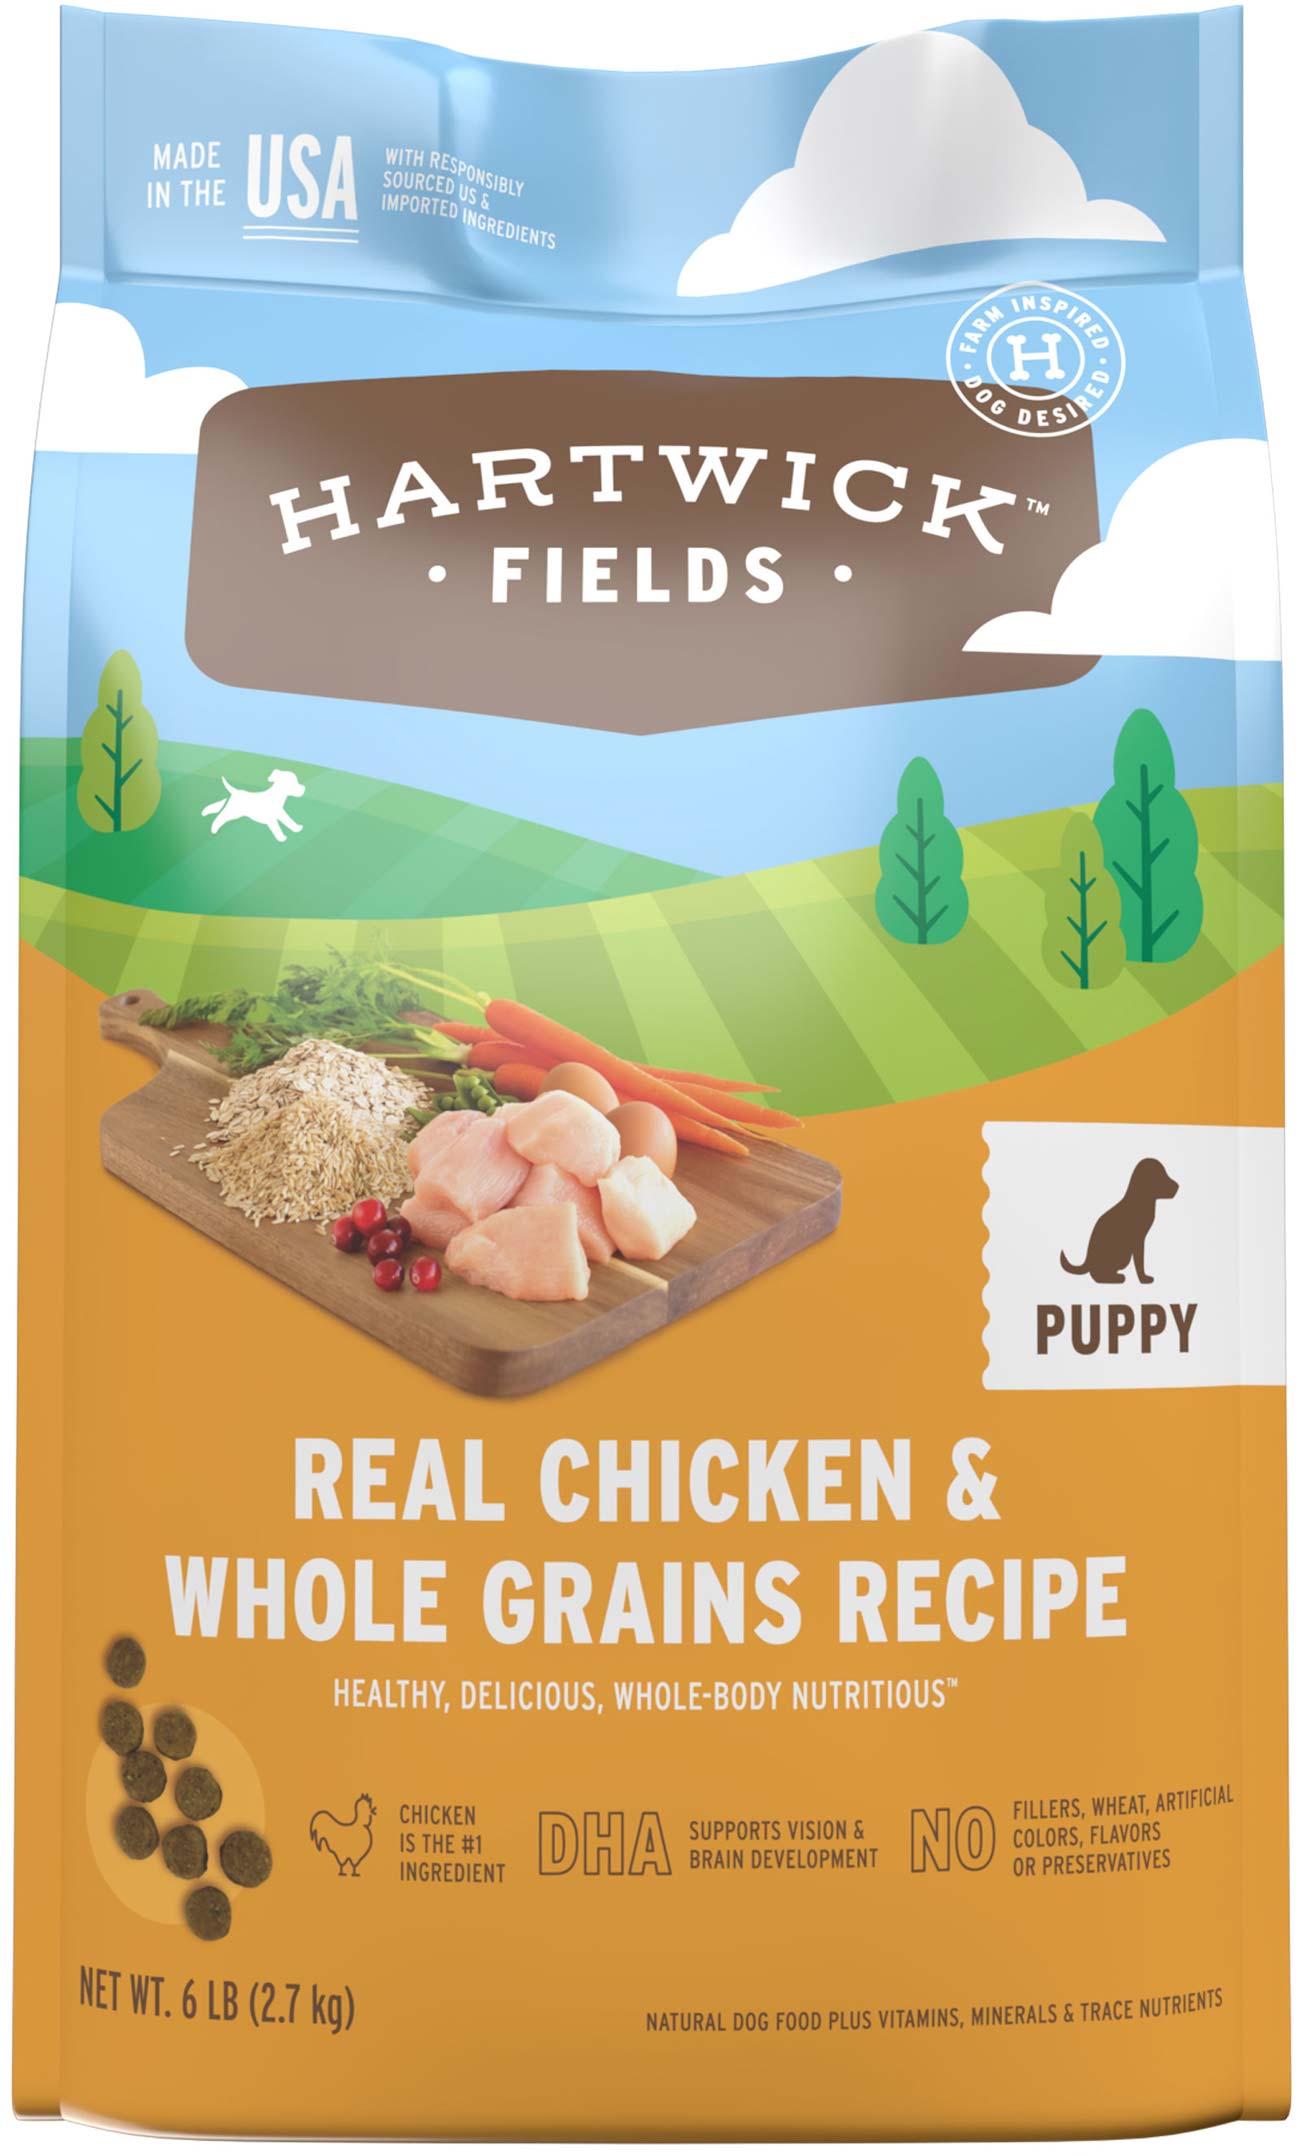 Hartwick Fields Puppy Real Chicken & Whole Grains Recipe, 6 Pounds